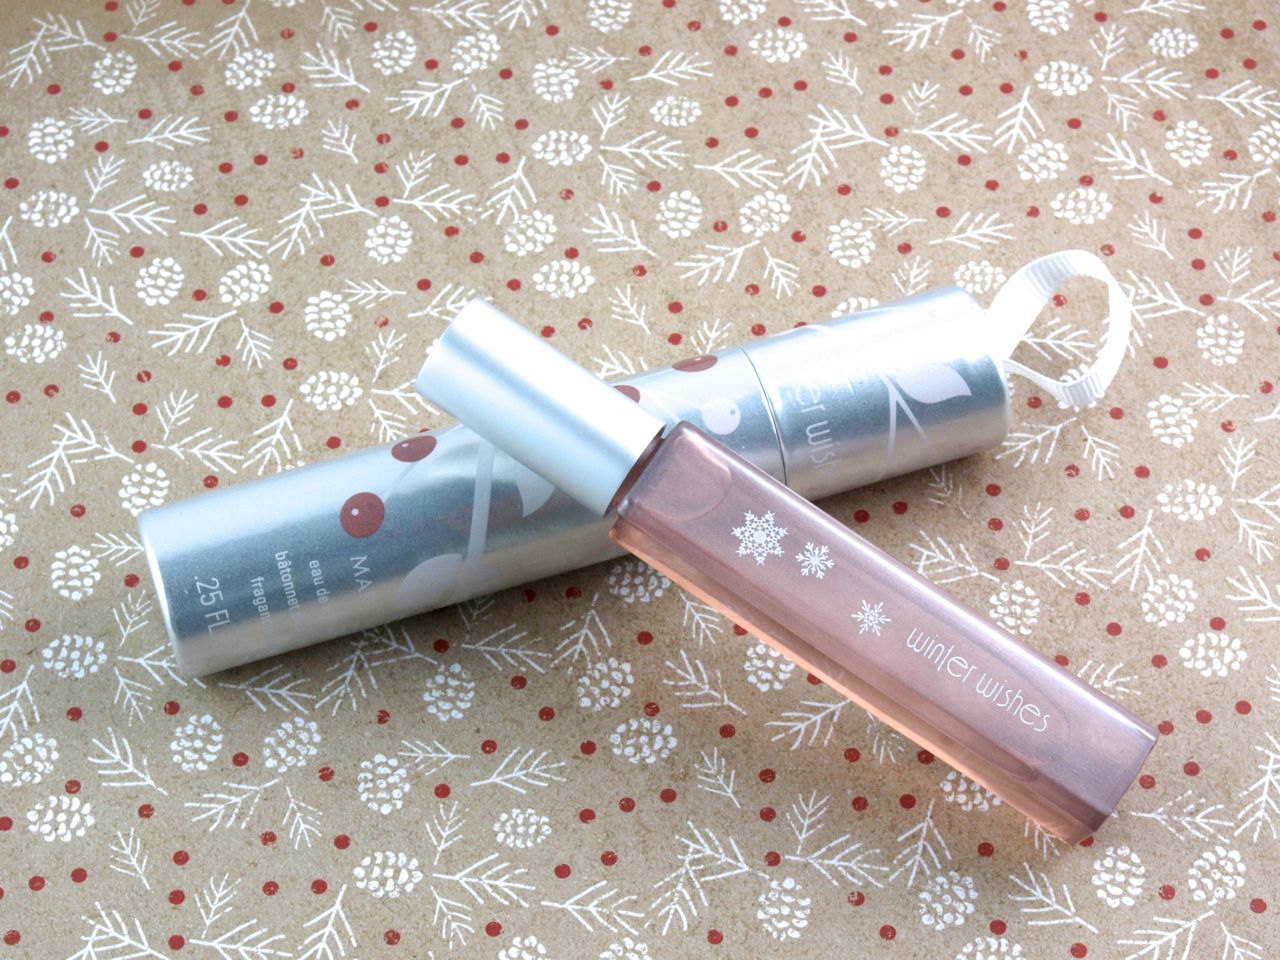 Mary Kay Holiday 2014 Winter Wishes Gift Set & Fragrance Wand: Review